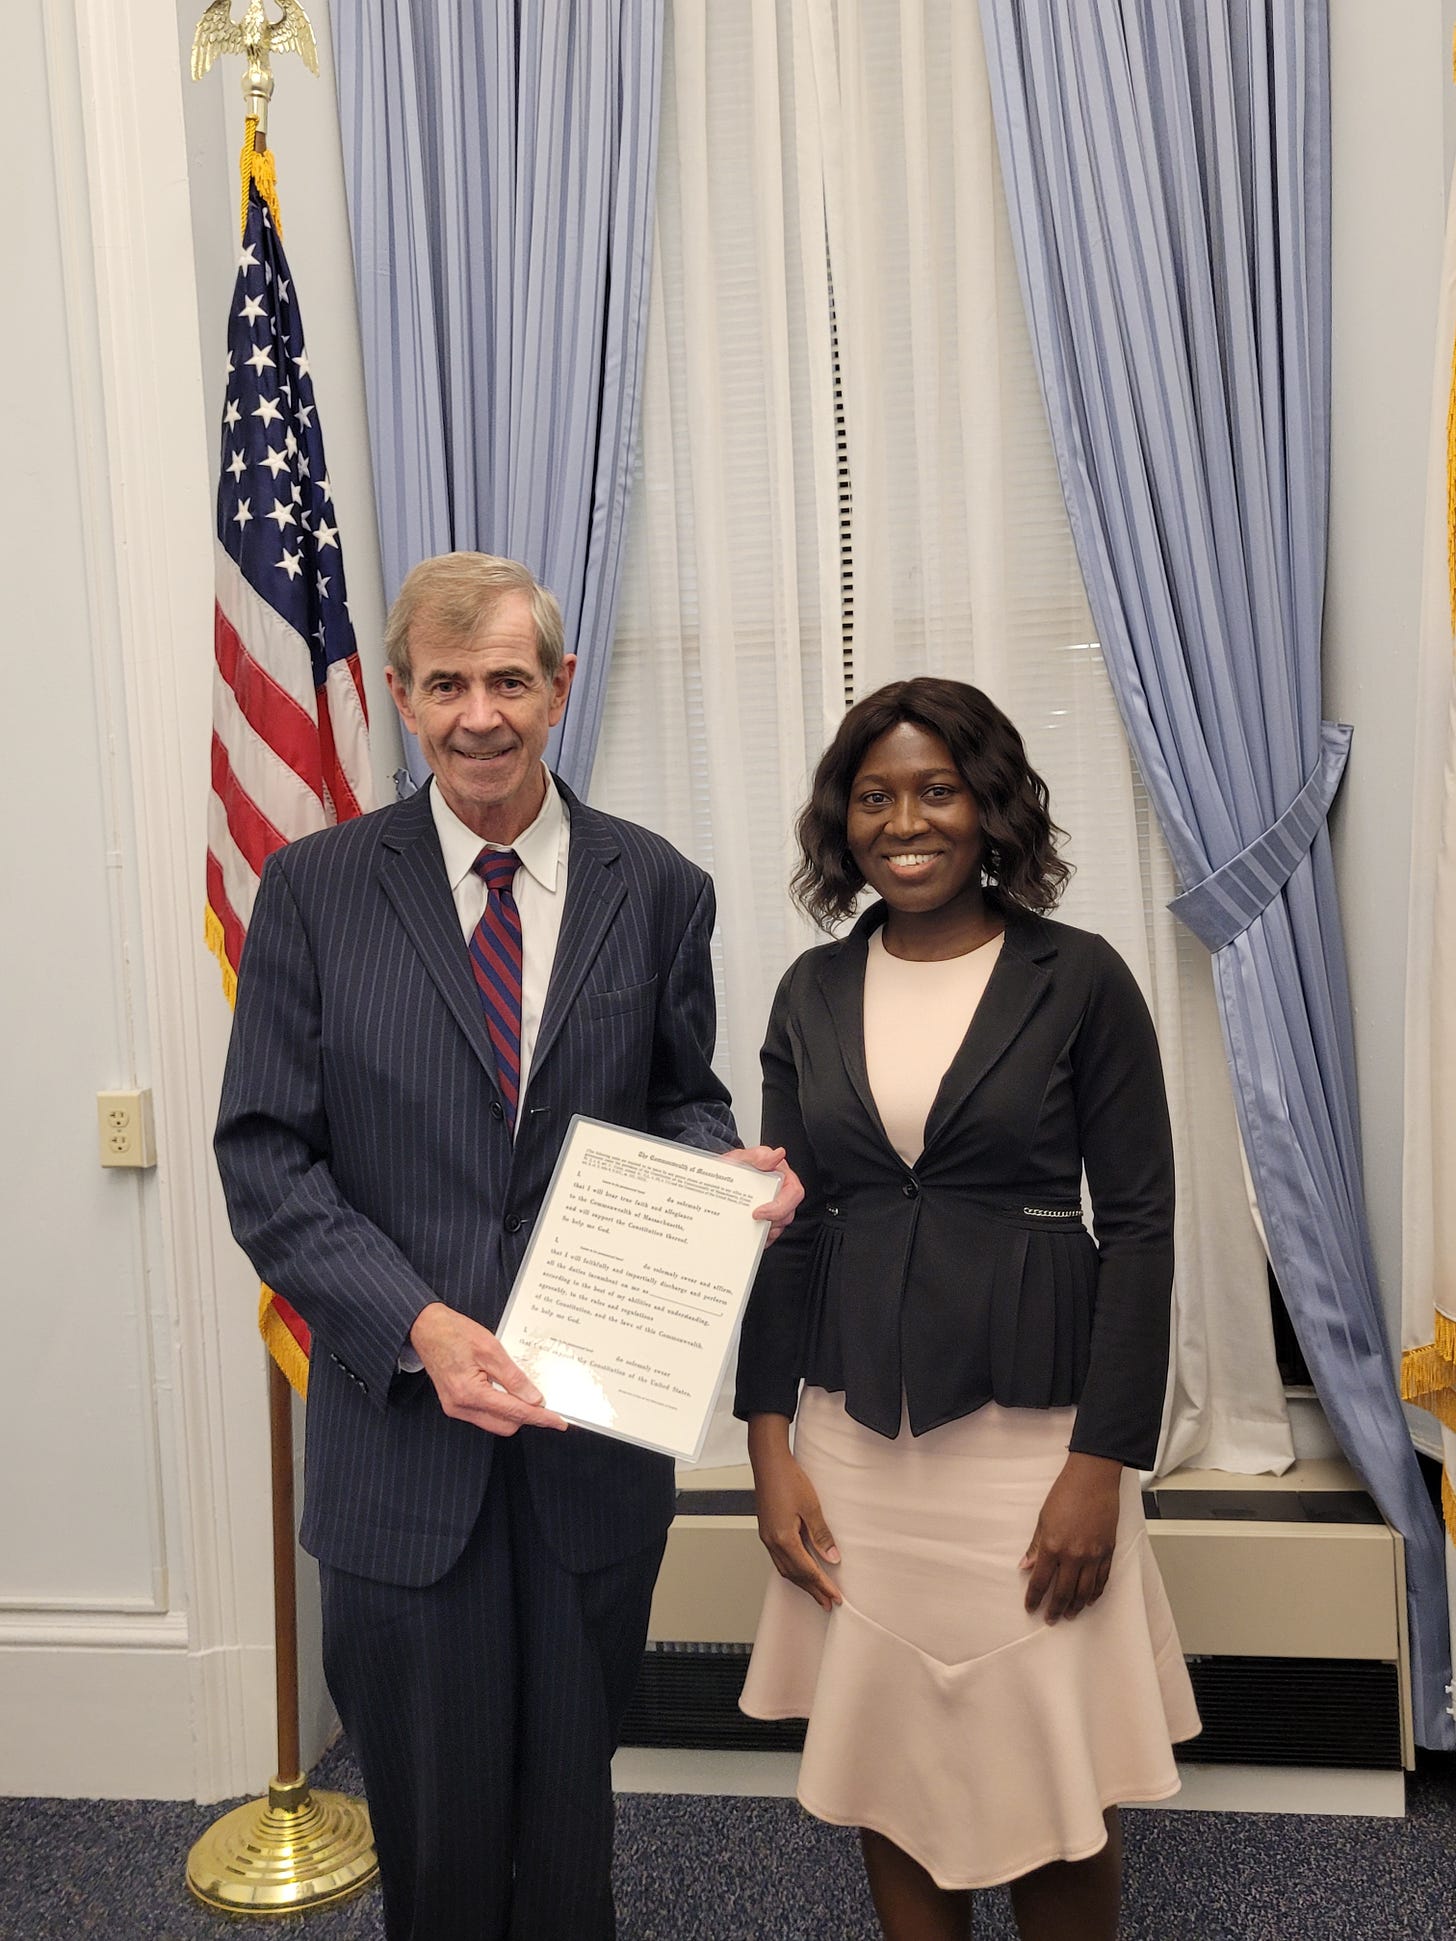 Attorney Manza Arthur is sworn in as the new supervisor of public records by Secretary of the Commonwealth William F. Galvin. (Credit: Secretary of the Commonwealth’s Office)